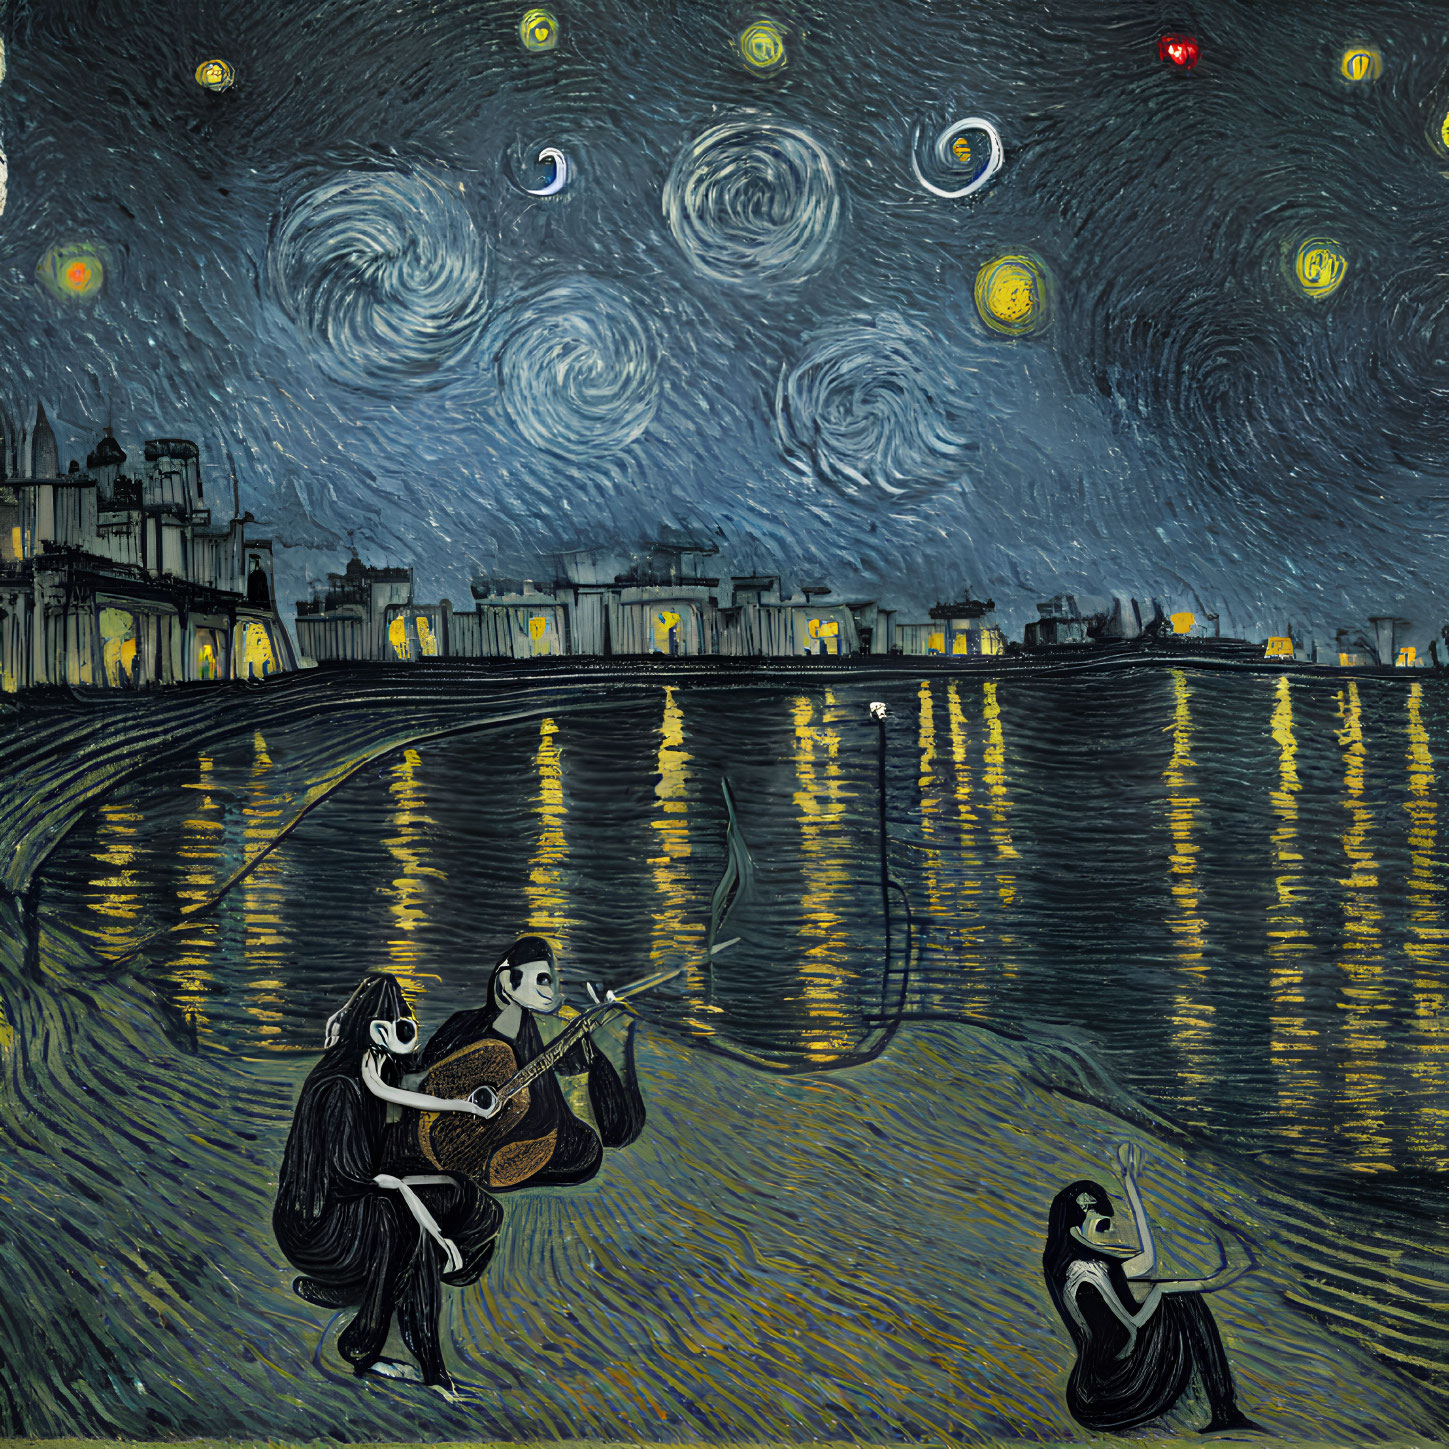 Nighttime riverbank scene with musicians, starry sky, and cityscape reflection.